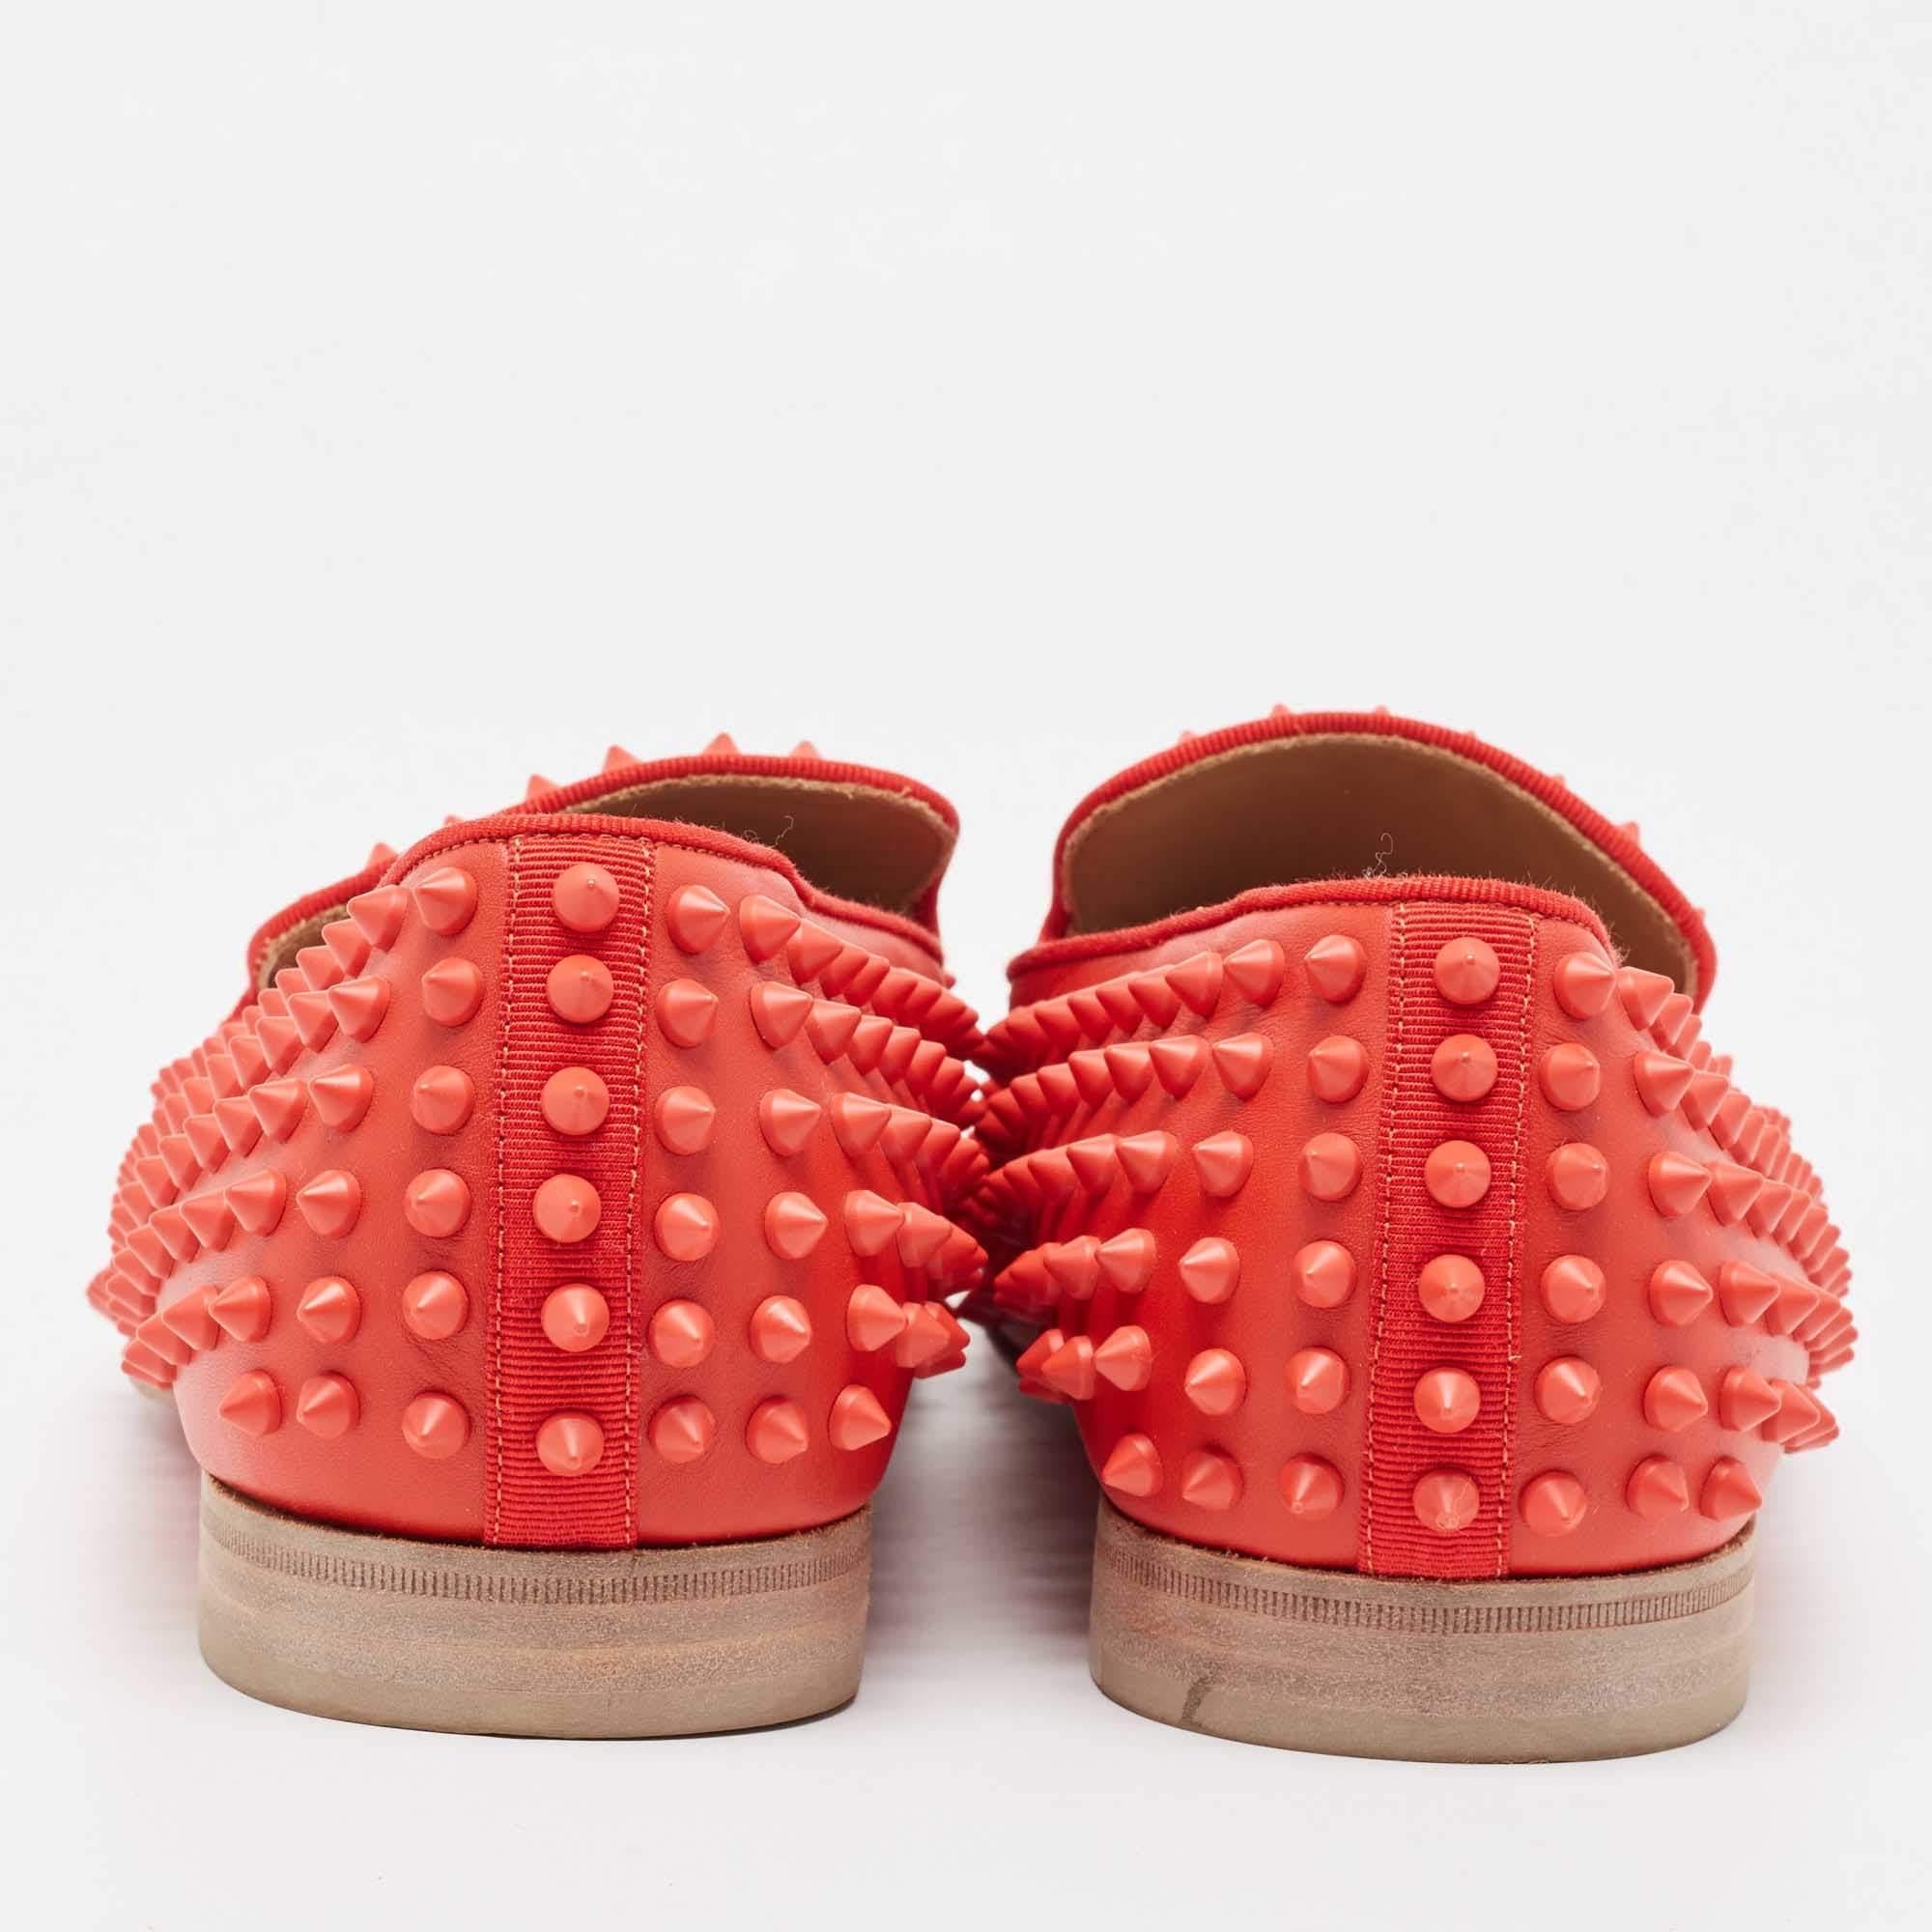 Men's Christian Louboutin Red Leather Rollerboy Spikes Smoking Slippers Size 42